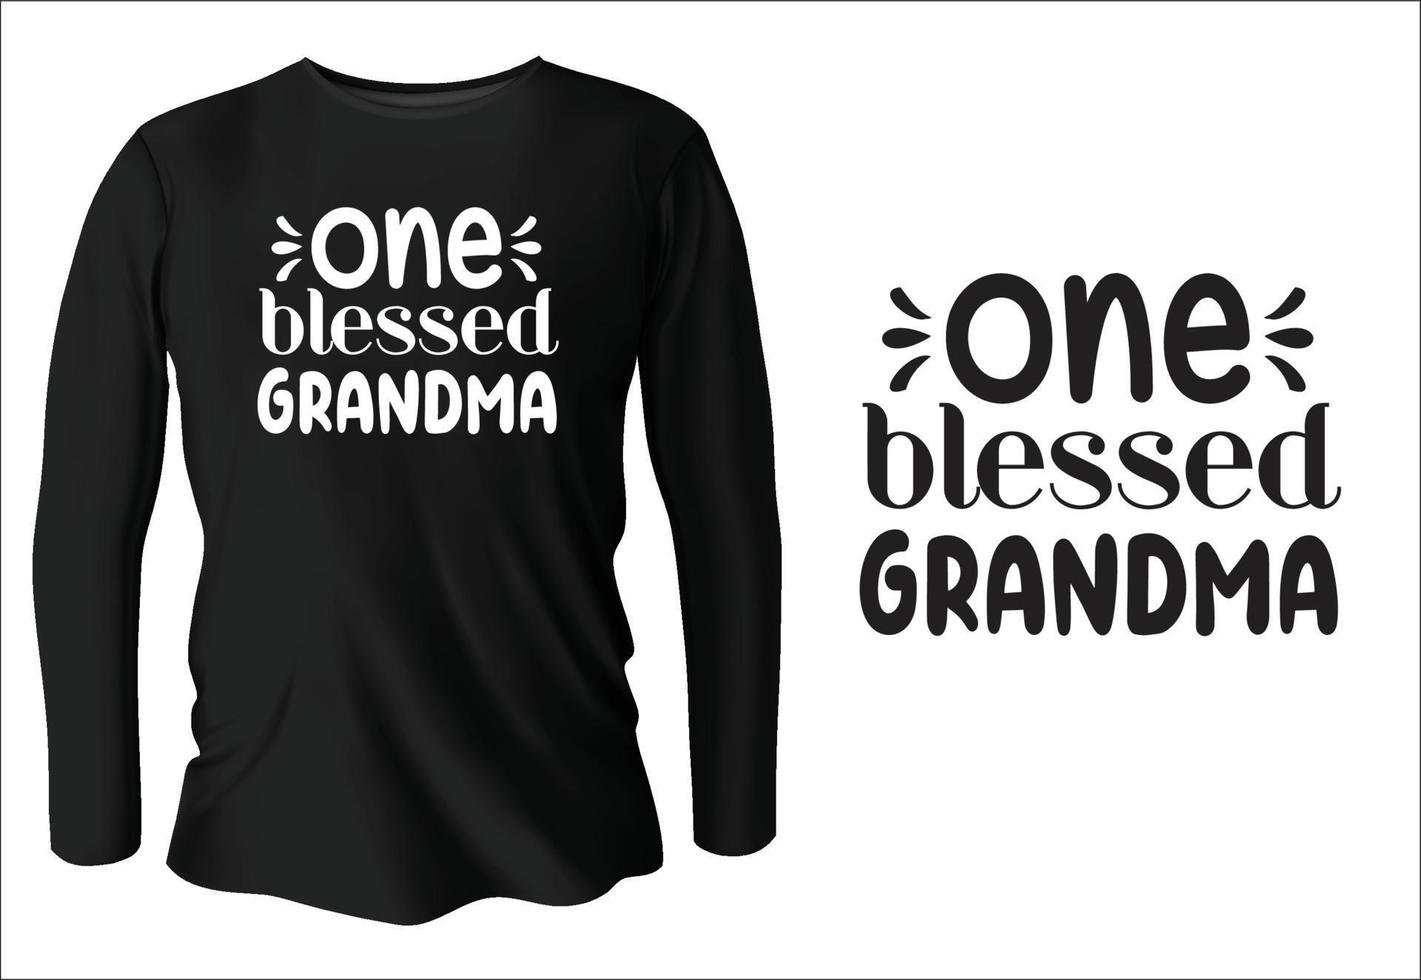 one blessed grandma t-shirt design with vector